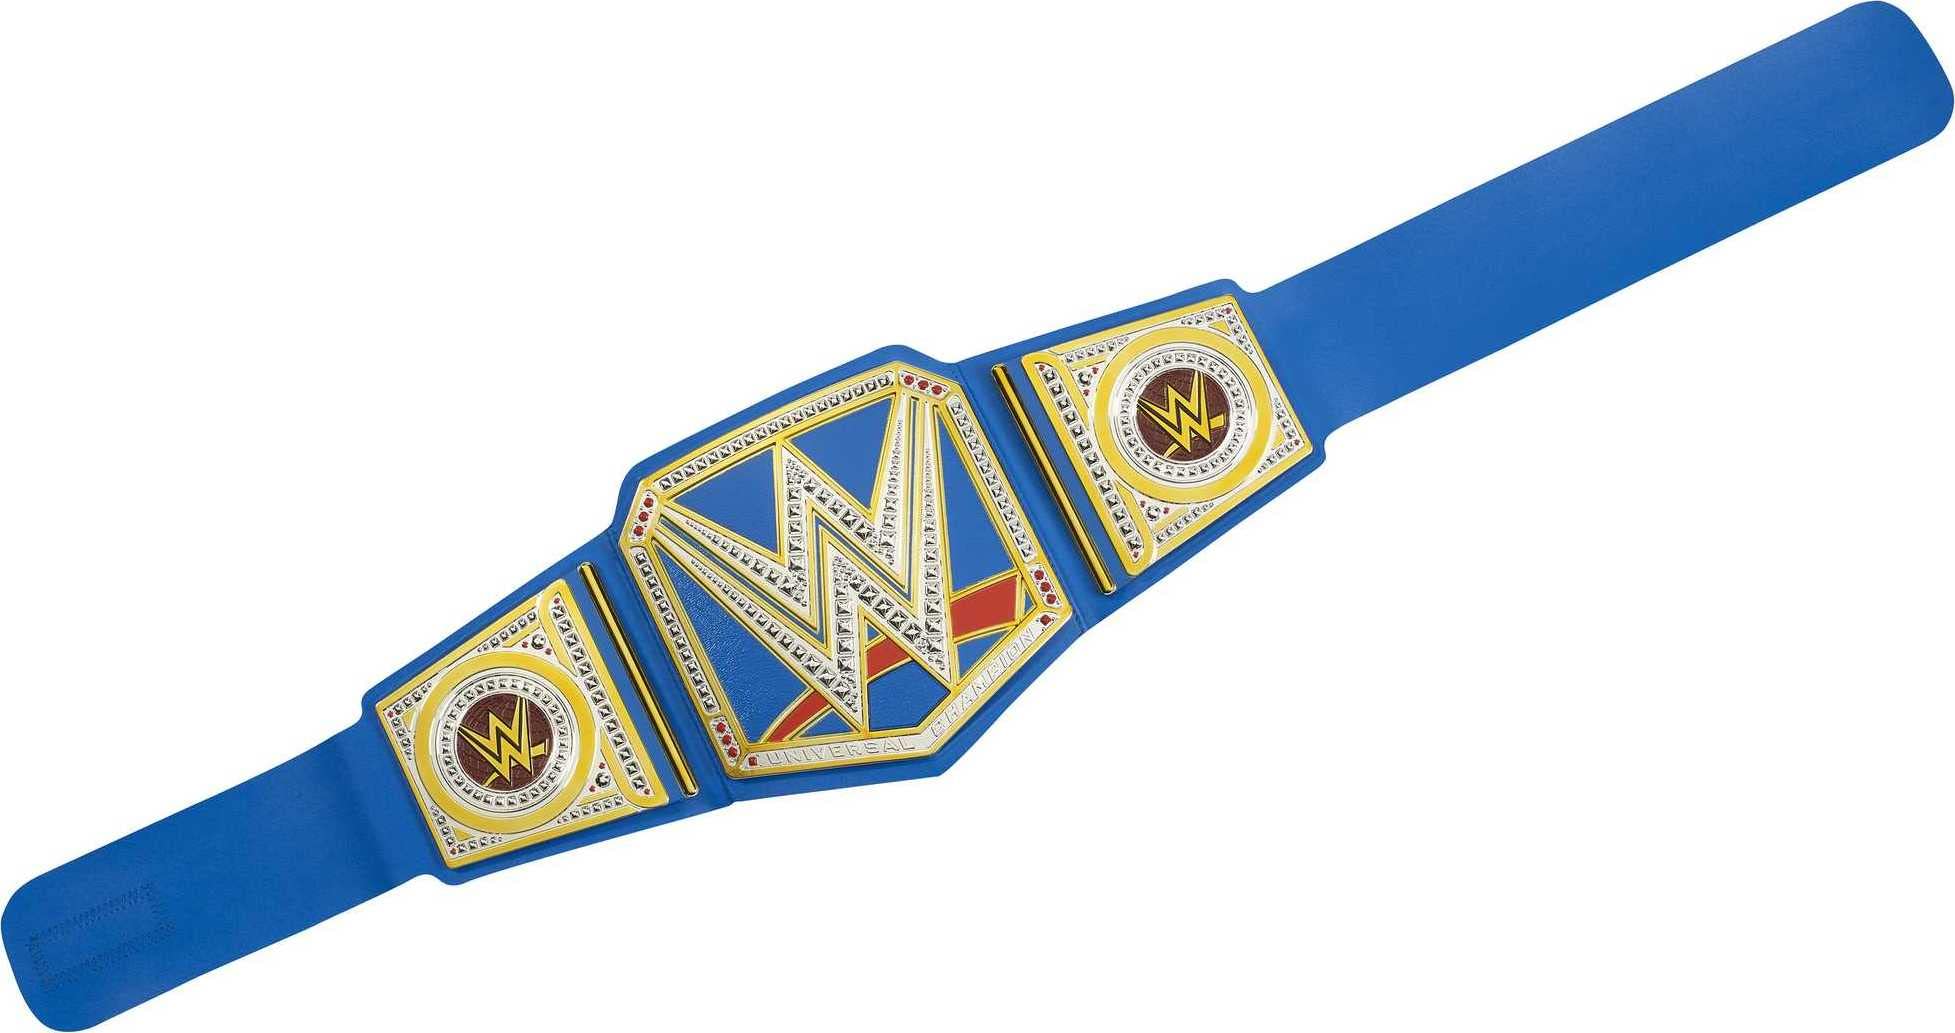 Mattel WWE Universal Championship Role Play Title Belt with Metallic Sideplates and Adjustable Strap for Kids, Blue/Gold